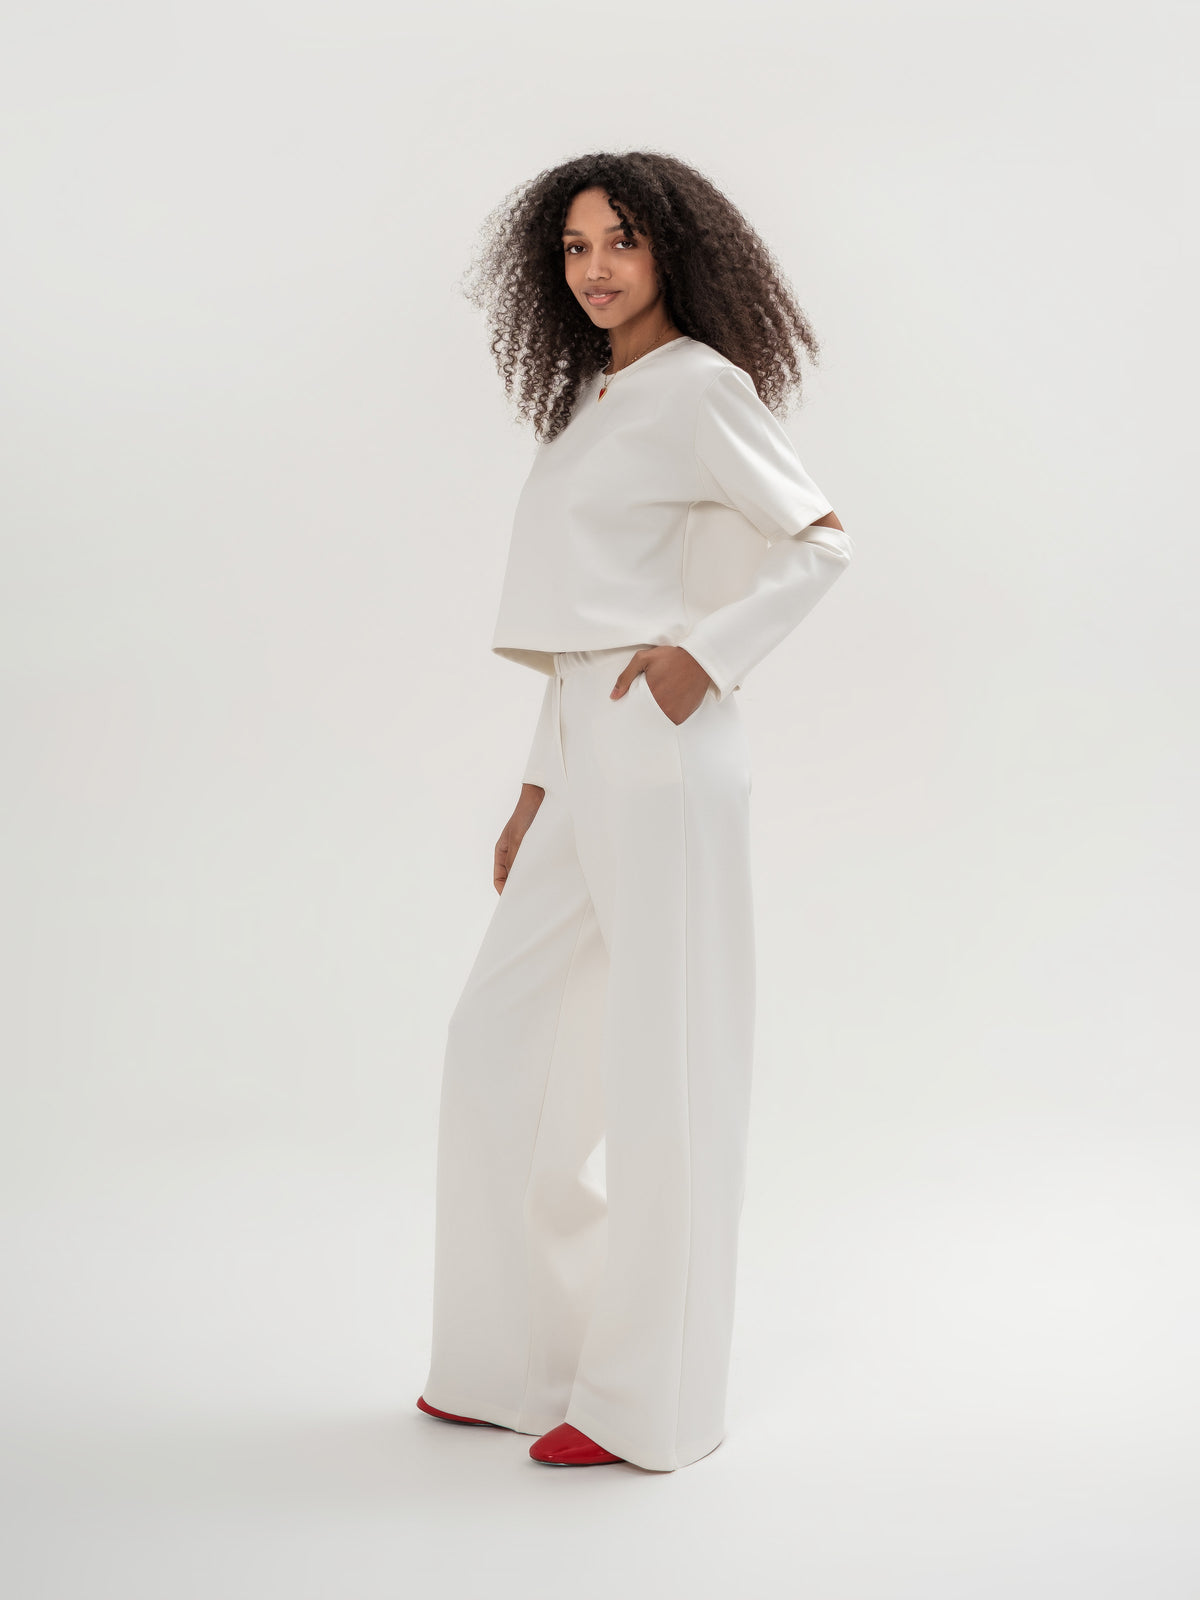 White wide leg trousers and white top with slits in the elbow area